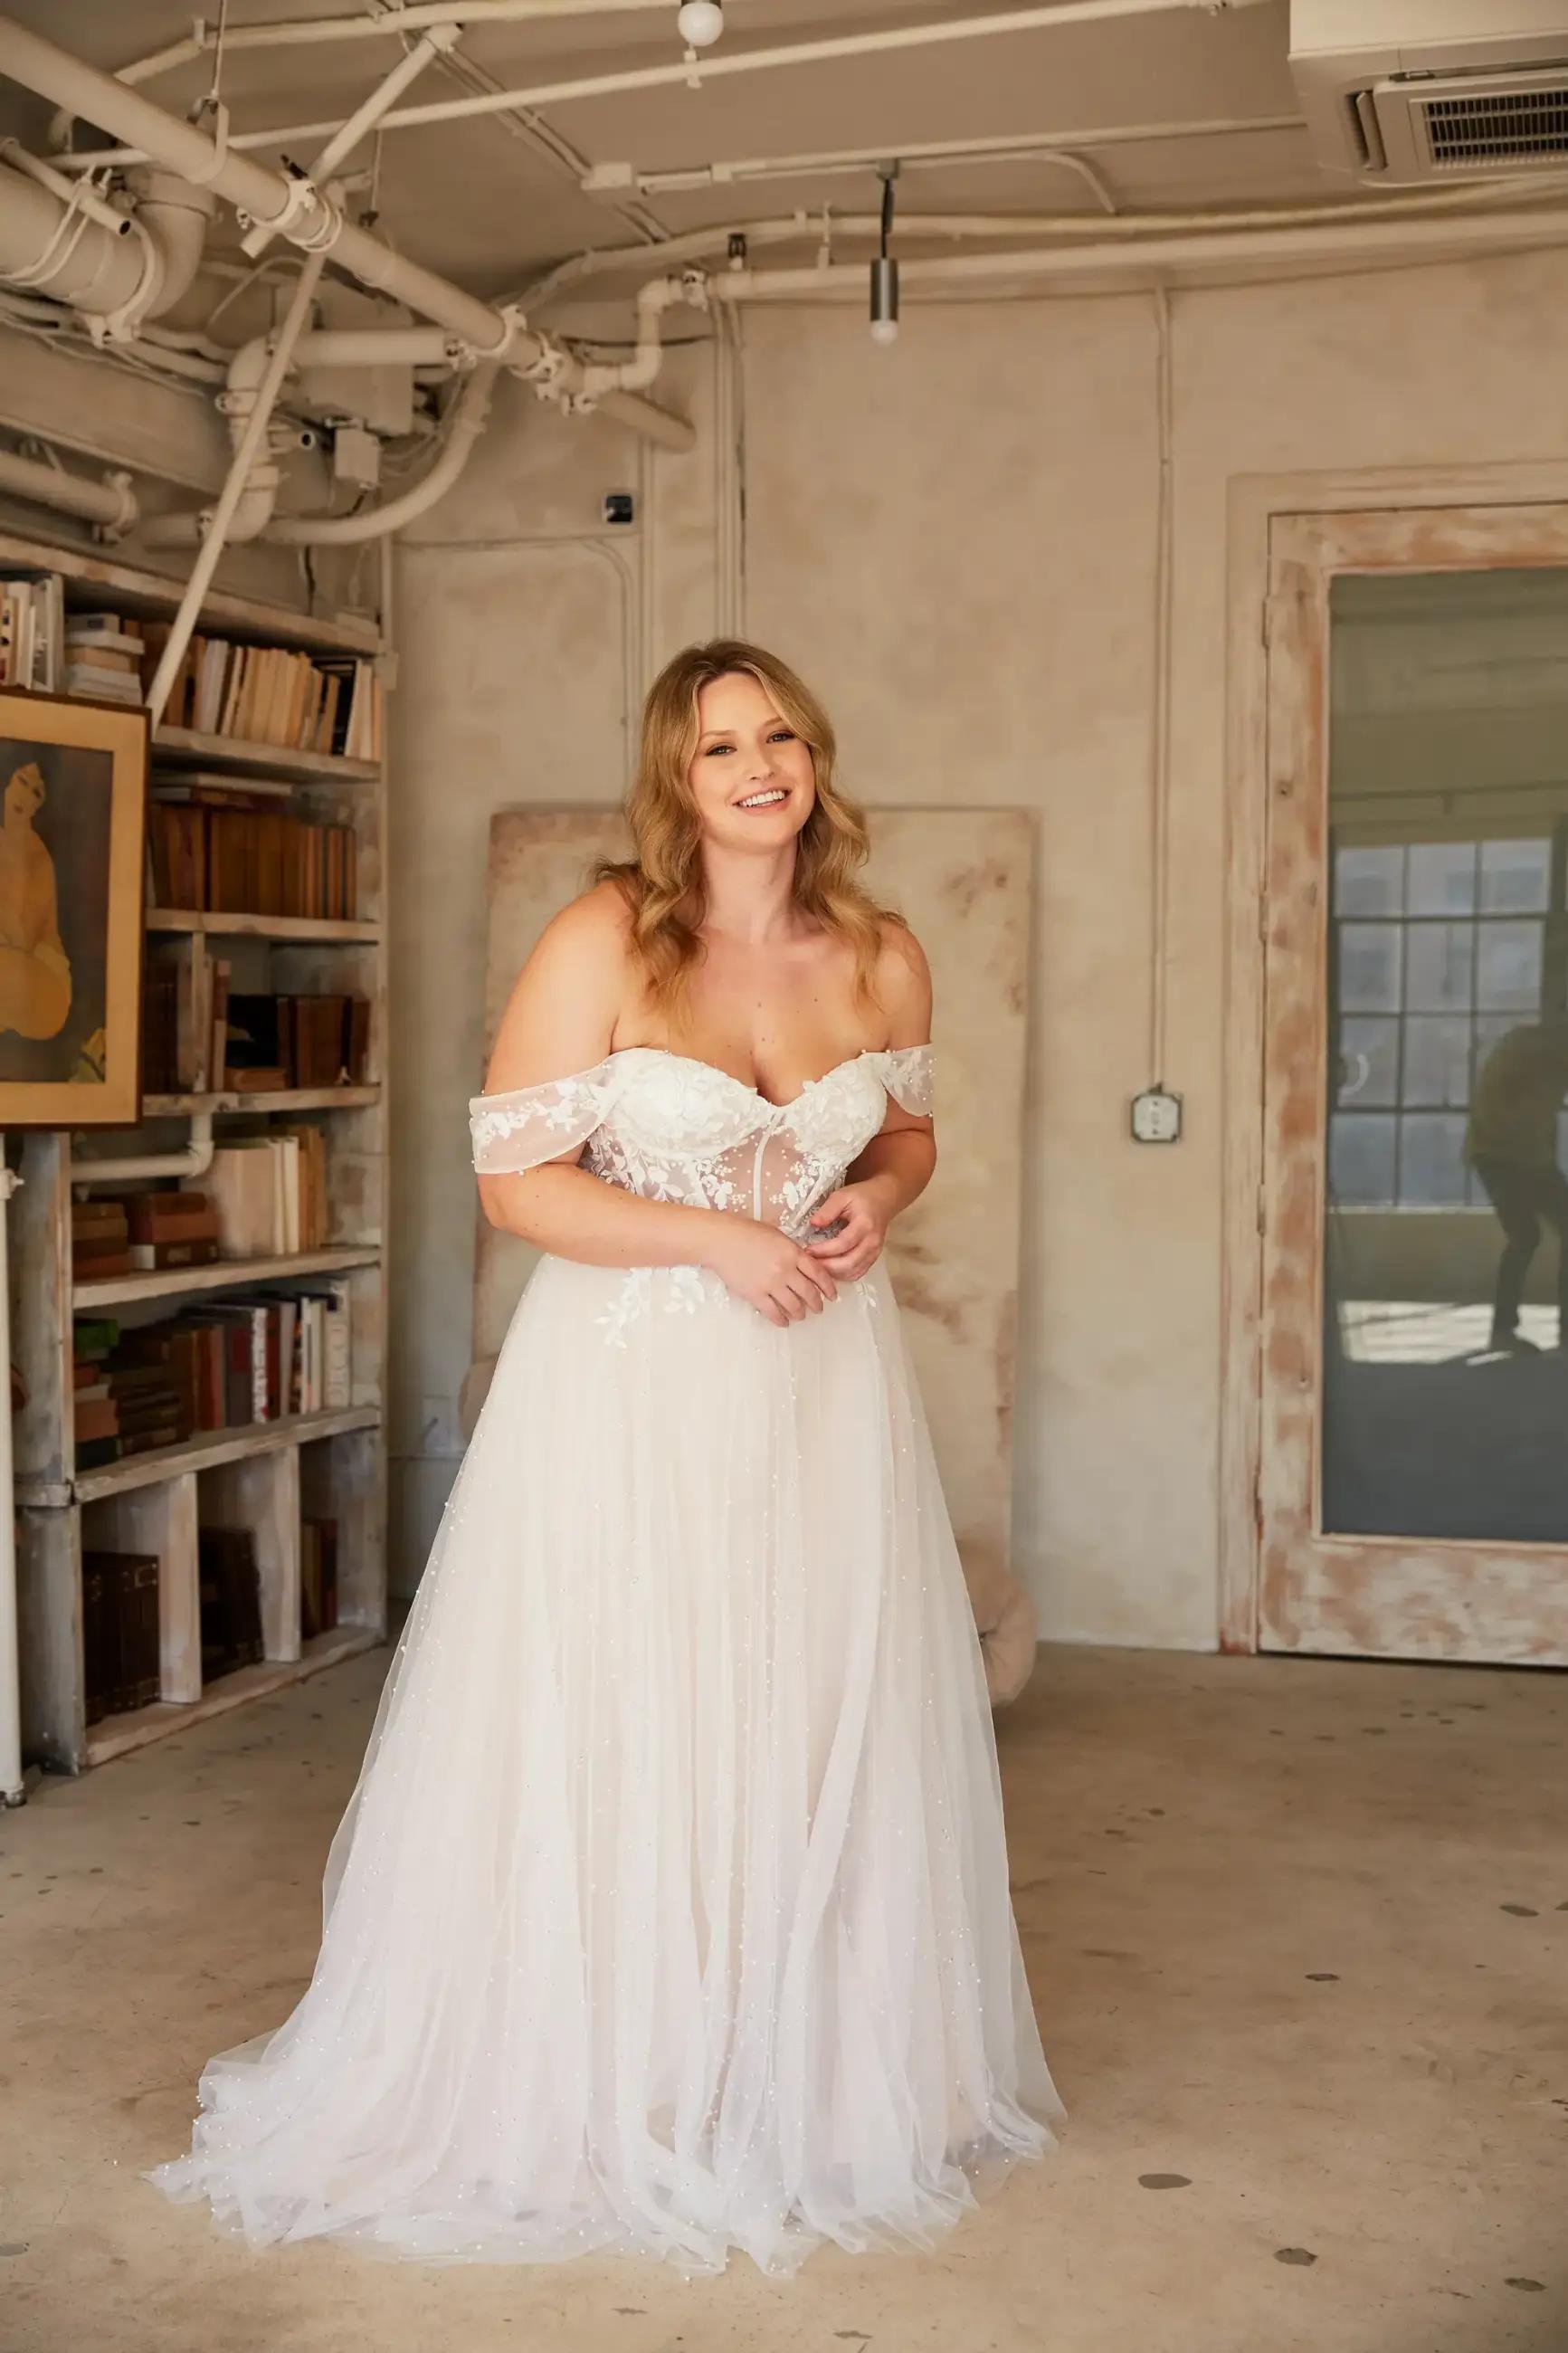 Fashion Forward: Trends in Plus-Size Wedding Dresses for Modern Brides Image